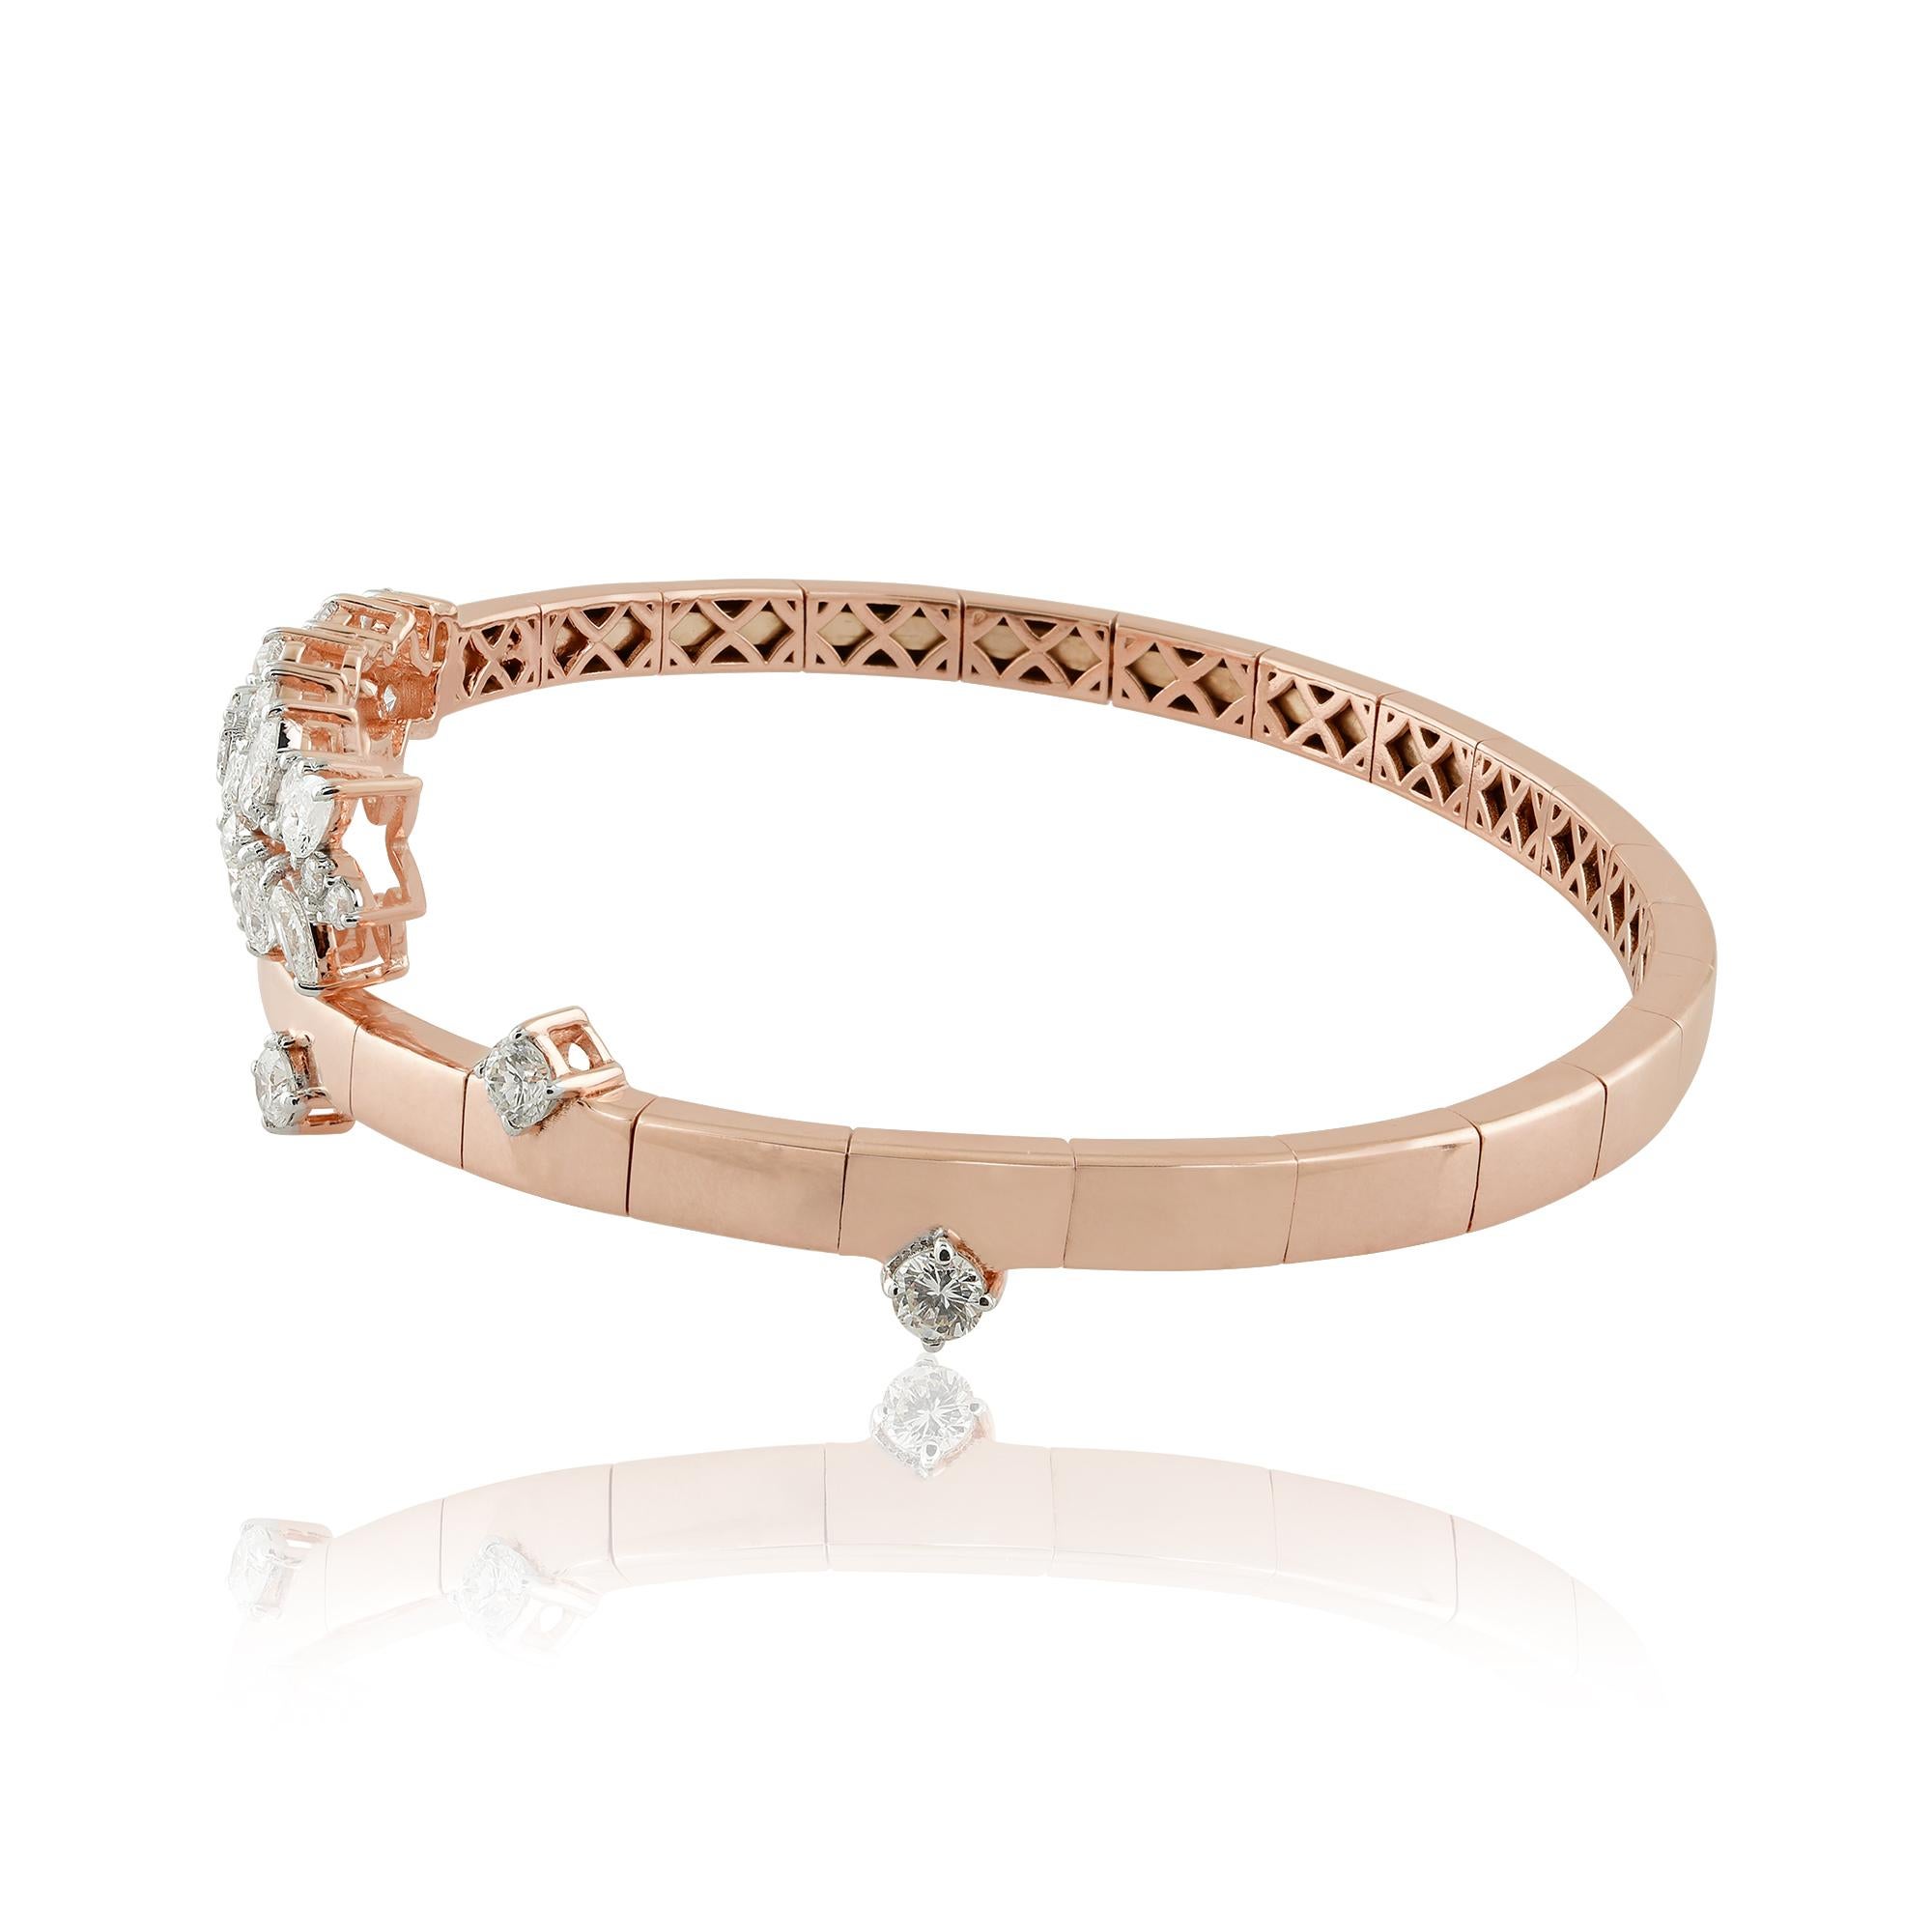 Item Code :- SEB-6059E
Gross Weight :- 15.27 gm
Solid 18k Rose Gold Weight :- 14.79 gm
Natural Diamond Weight :- 2.40 Carat ( AVERAGE DIAMOND CLARITY SI1-SI2 & COLOR H-I )
Bangle Size :- 56 mm approx.
✦ Sizing
.....................
We can adjust